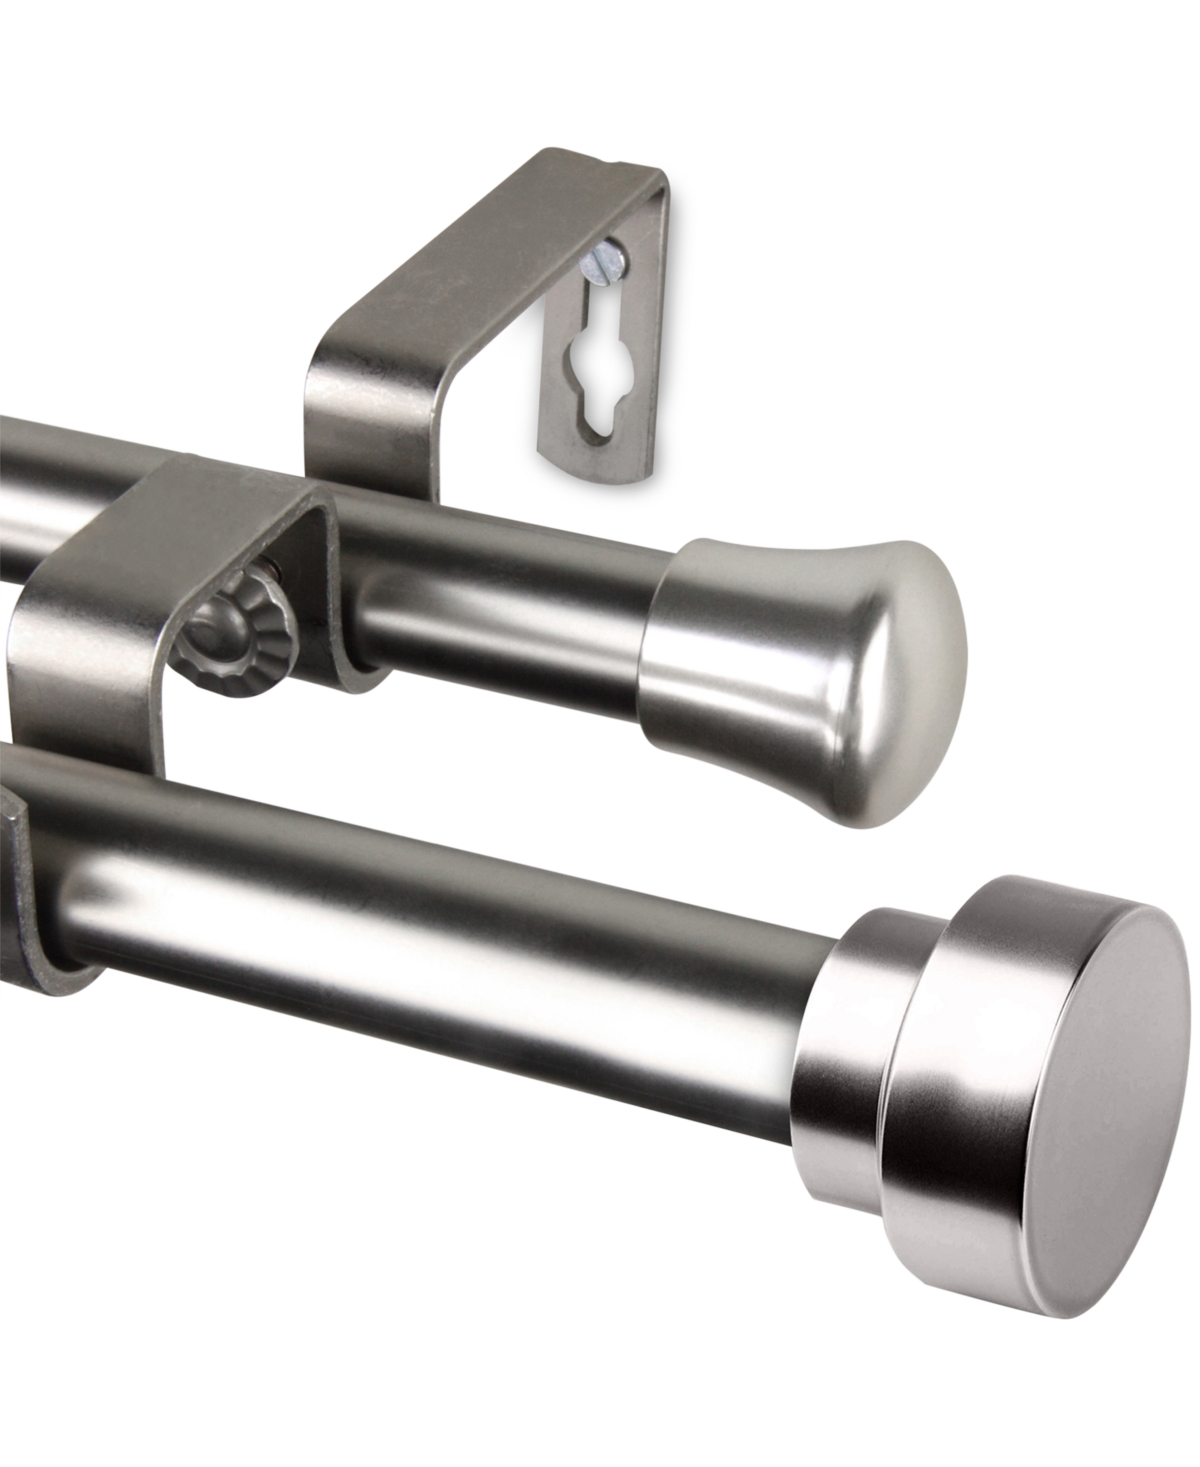 Topper 13/16" Double Curtain Rod 28-48" - Satin Nickel